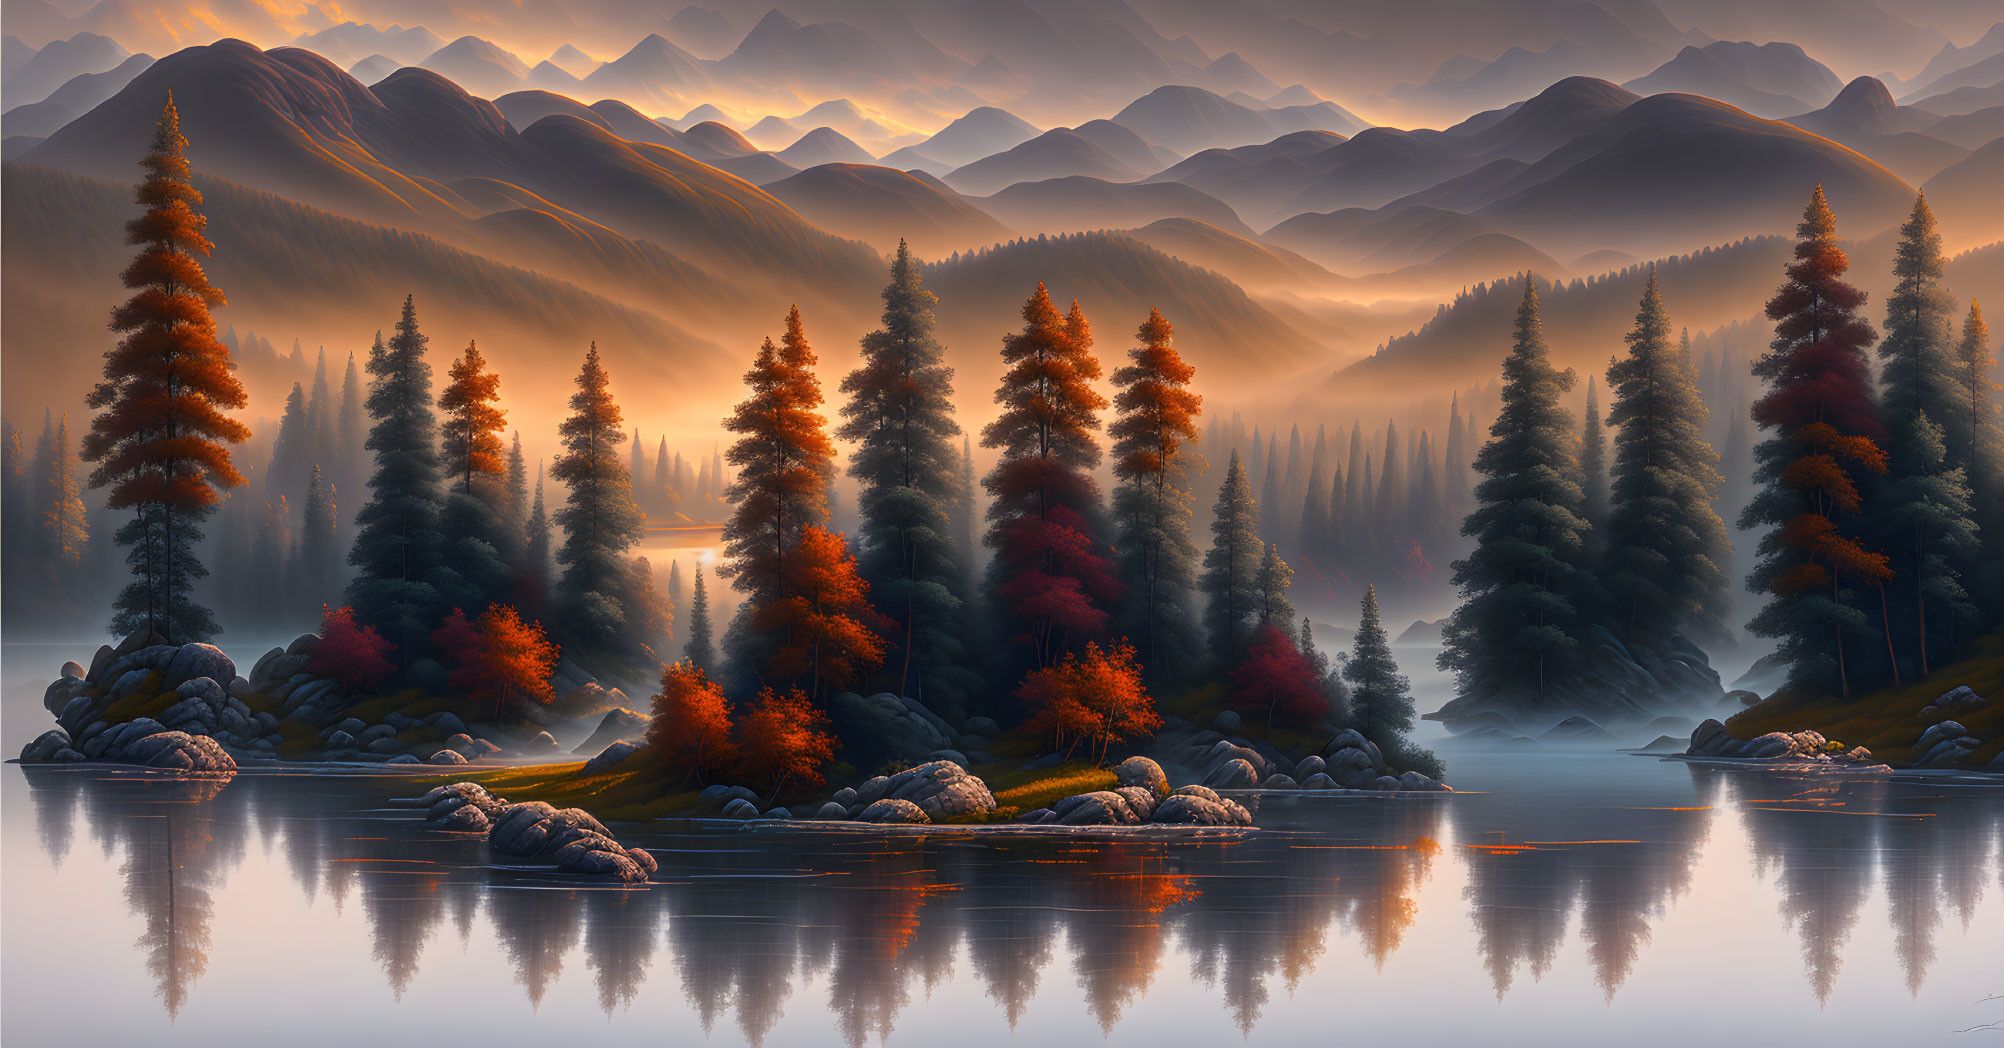 Misty Mountain Landscape with Autumn Trees and Lake at Sunrise